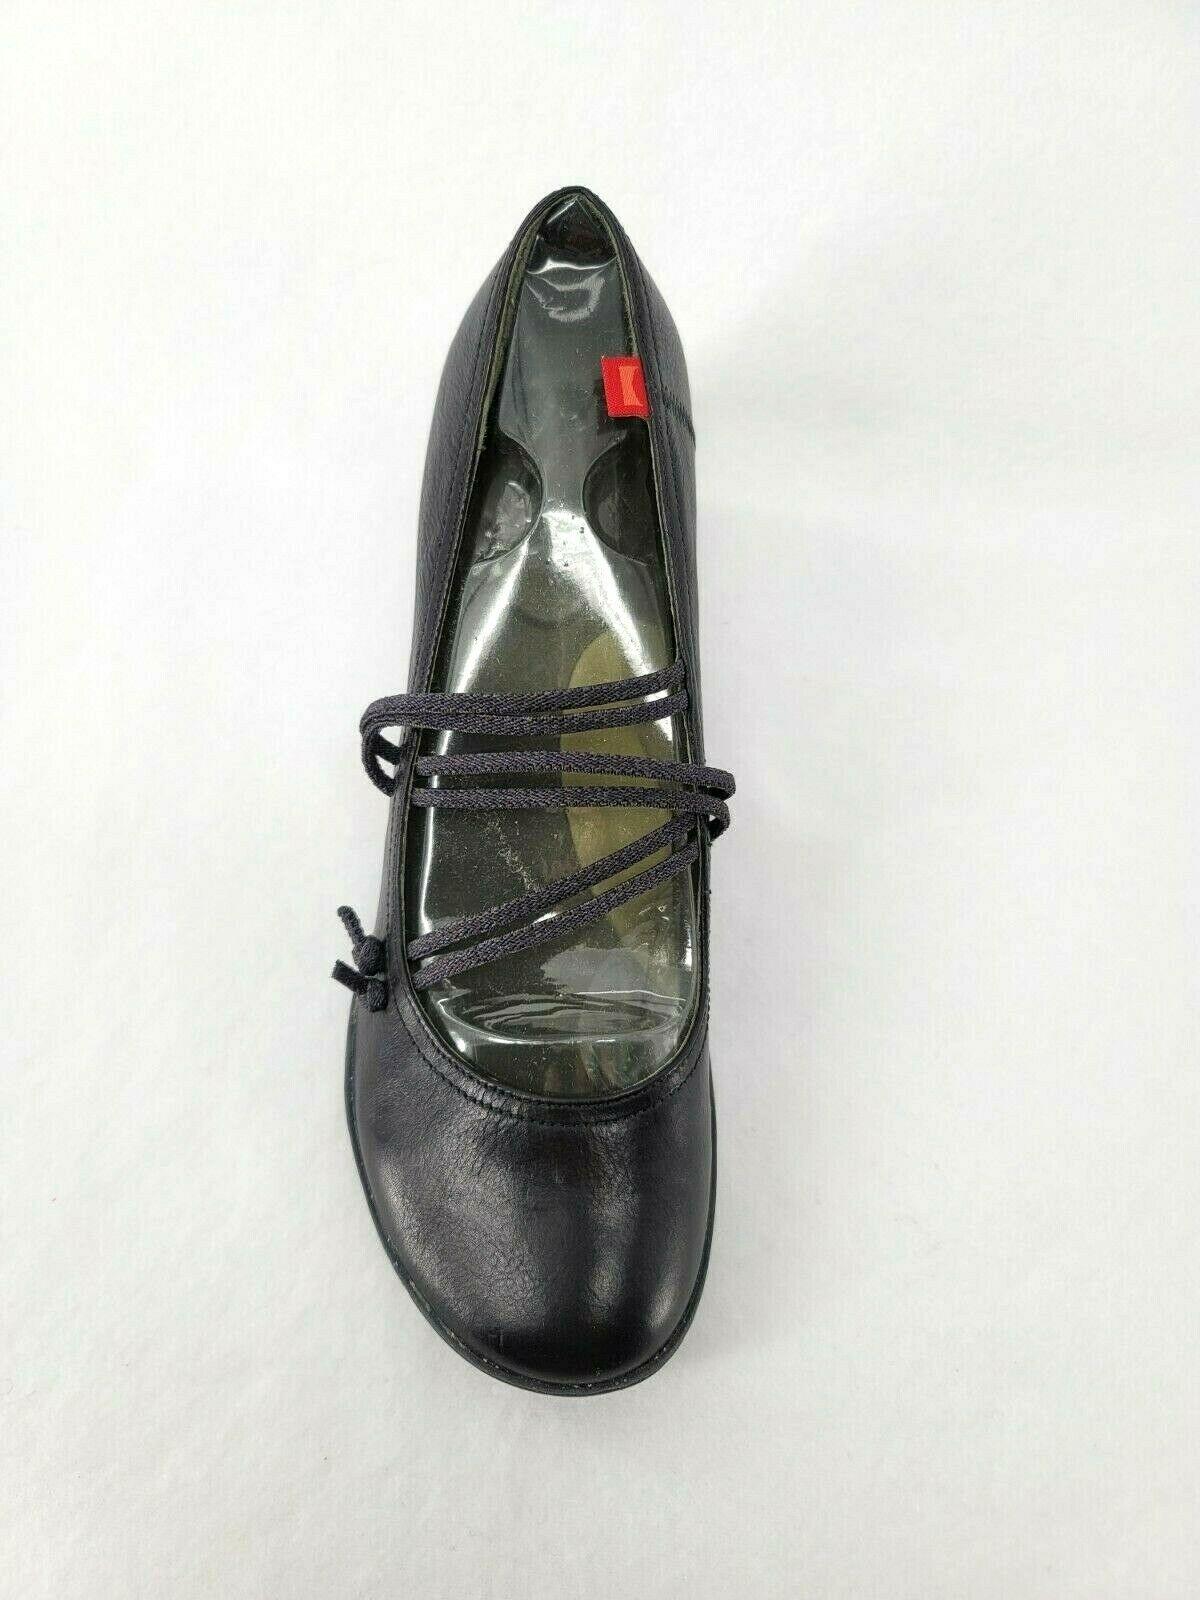 Camper Peu Nara Leather Women's Black With Straps Mary Jane Heels EU 40 - SVNYFancy